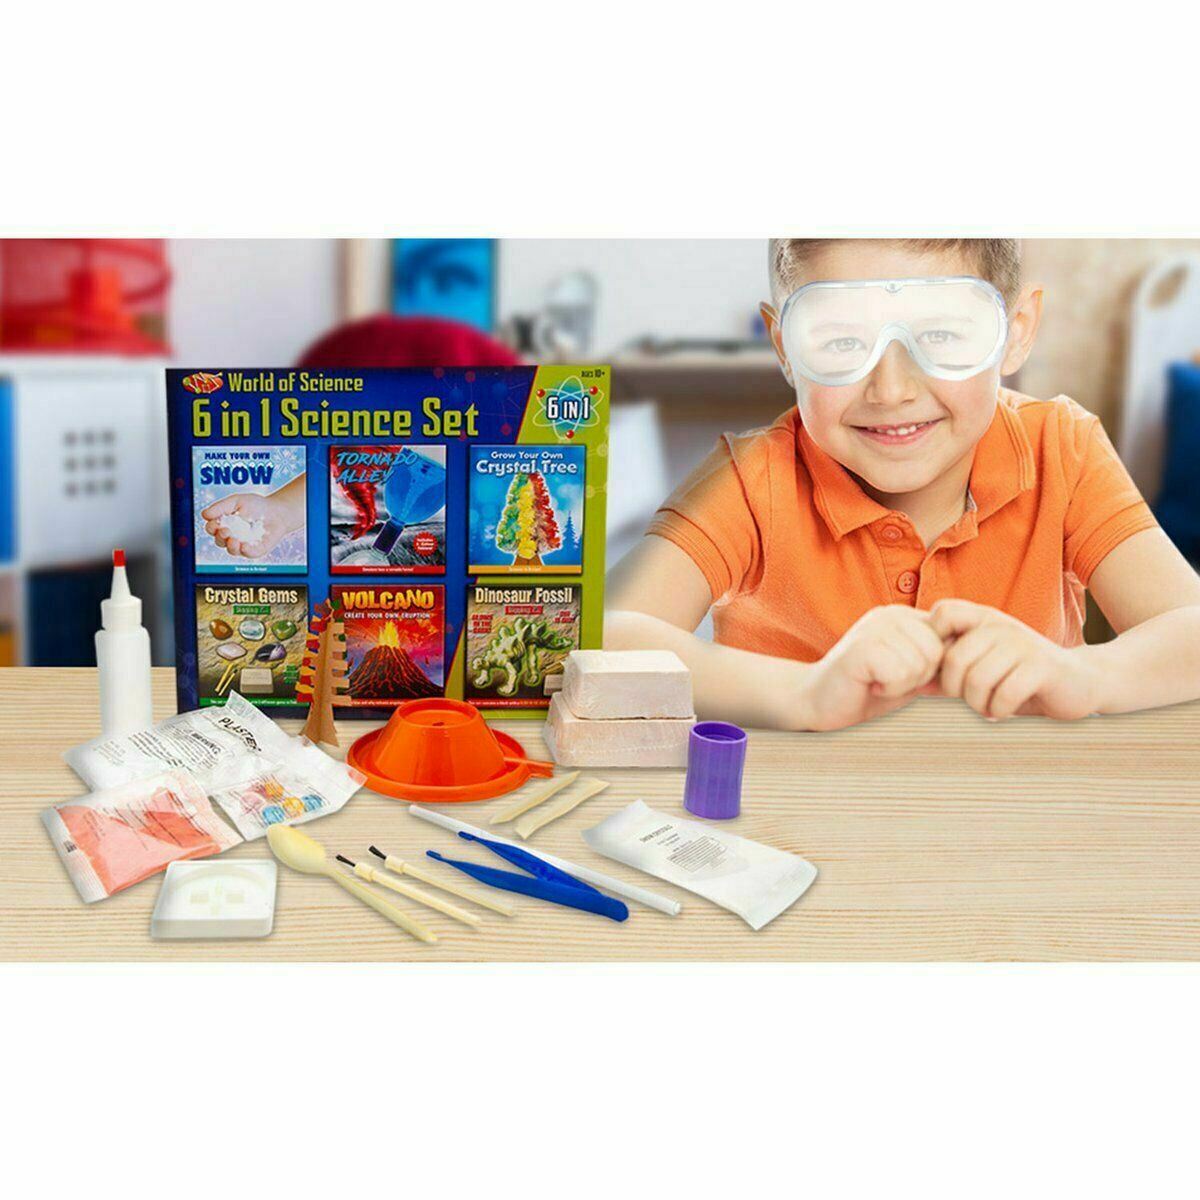 MYO 6 in 1 Science Set The Magic Toy Shop - The Magic Toy Shop